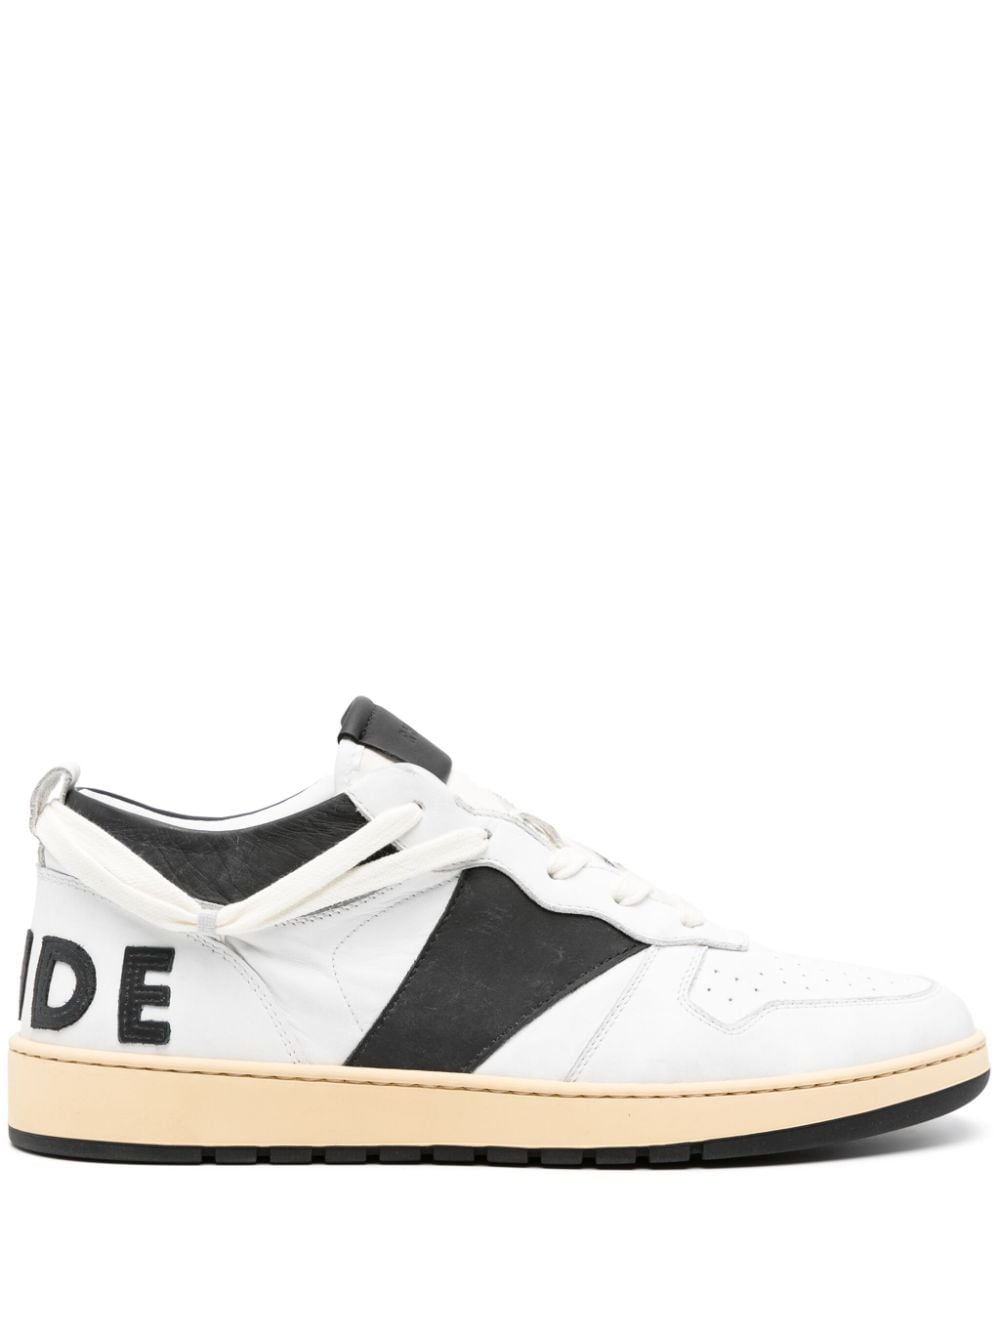 Rhude Rhecess leather sneakers - White